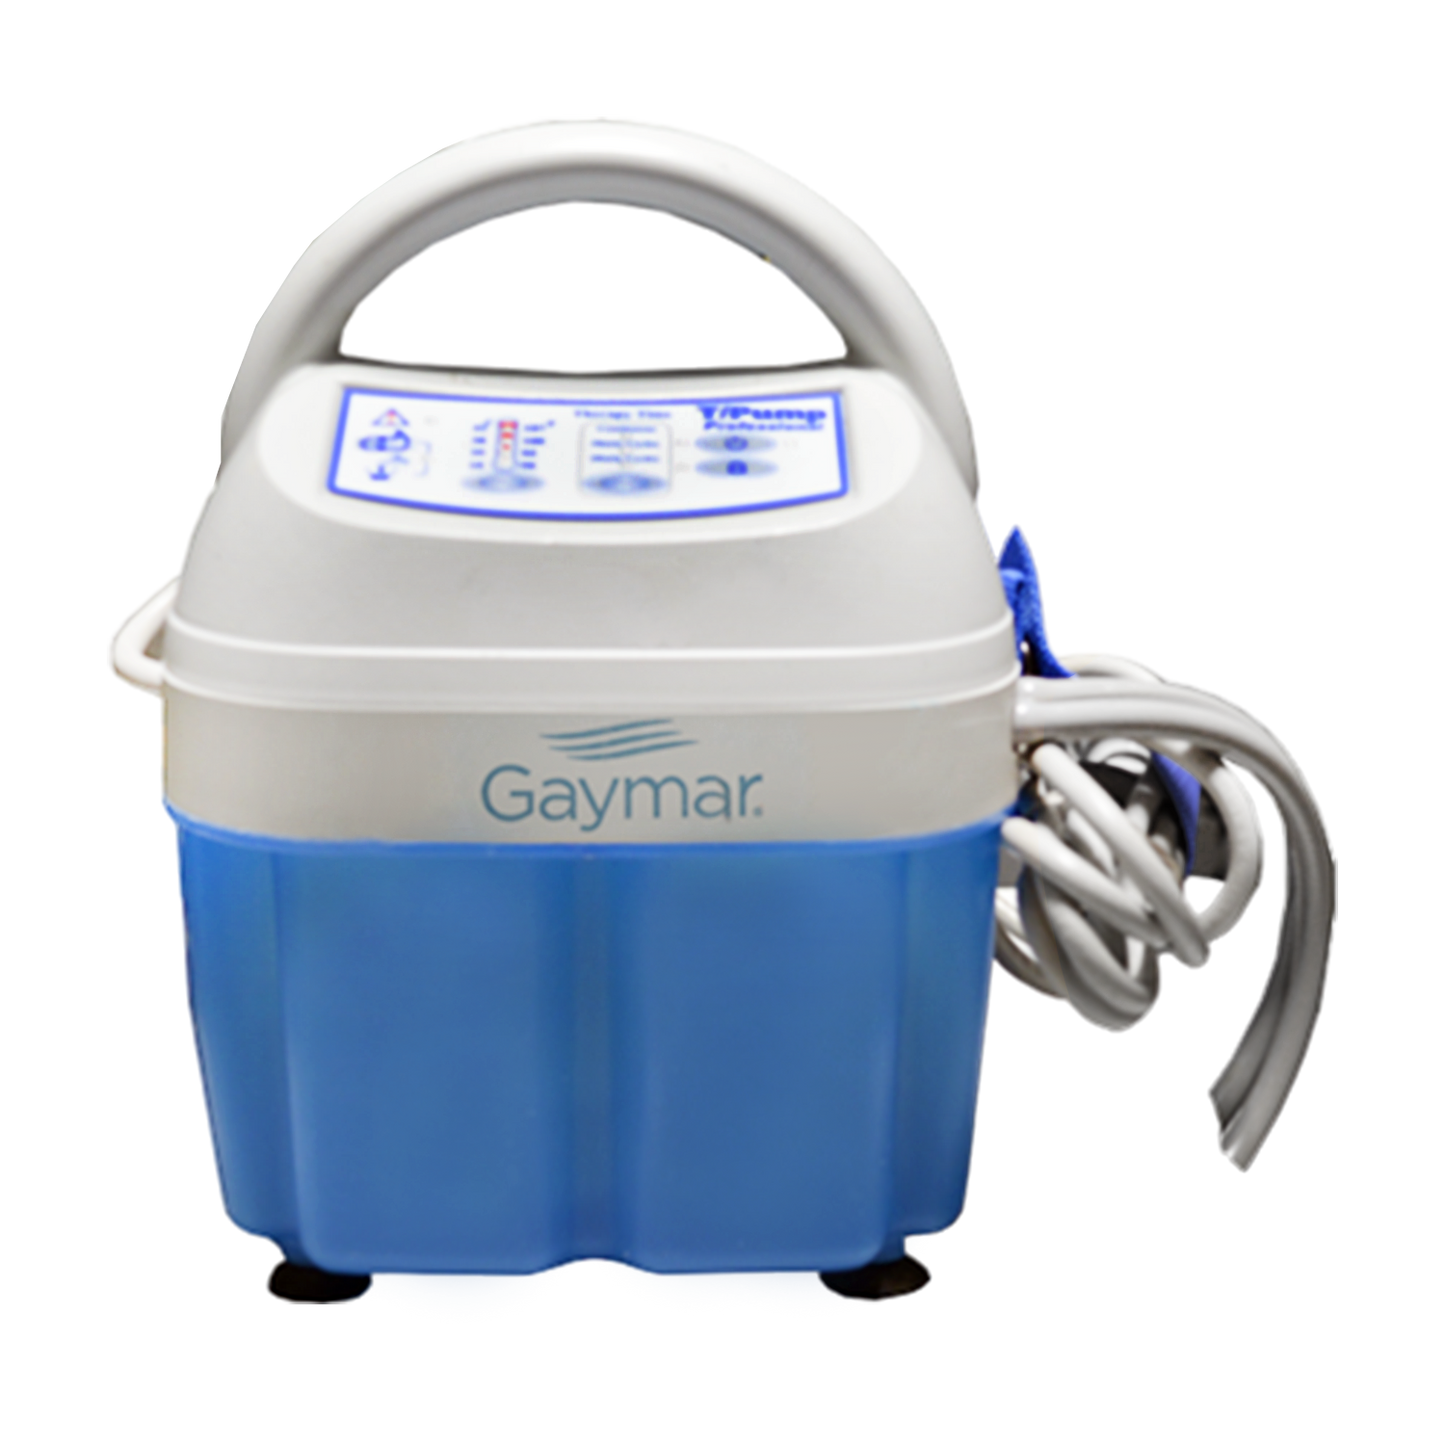 Stryker Gaymar TP700 TPump Therapy System